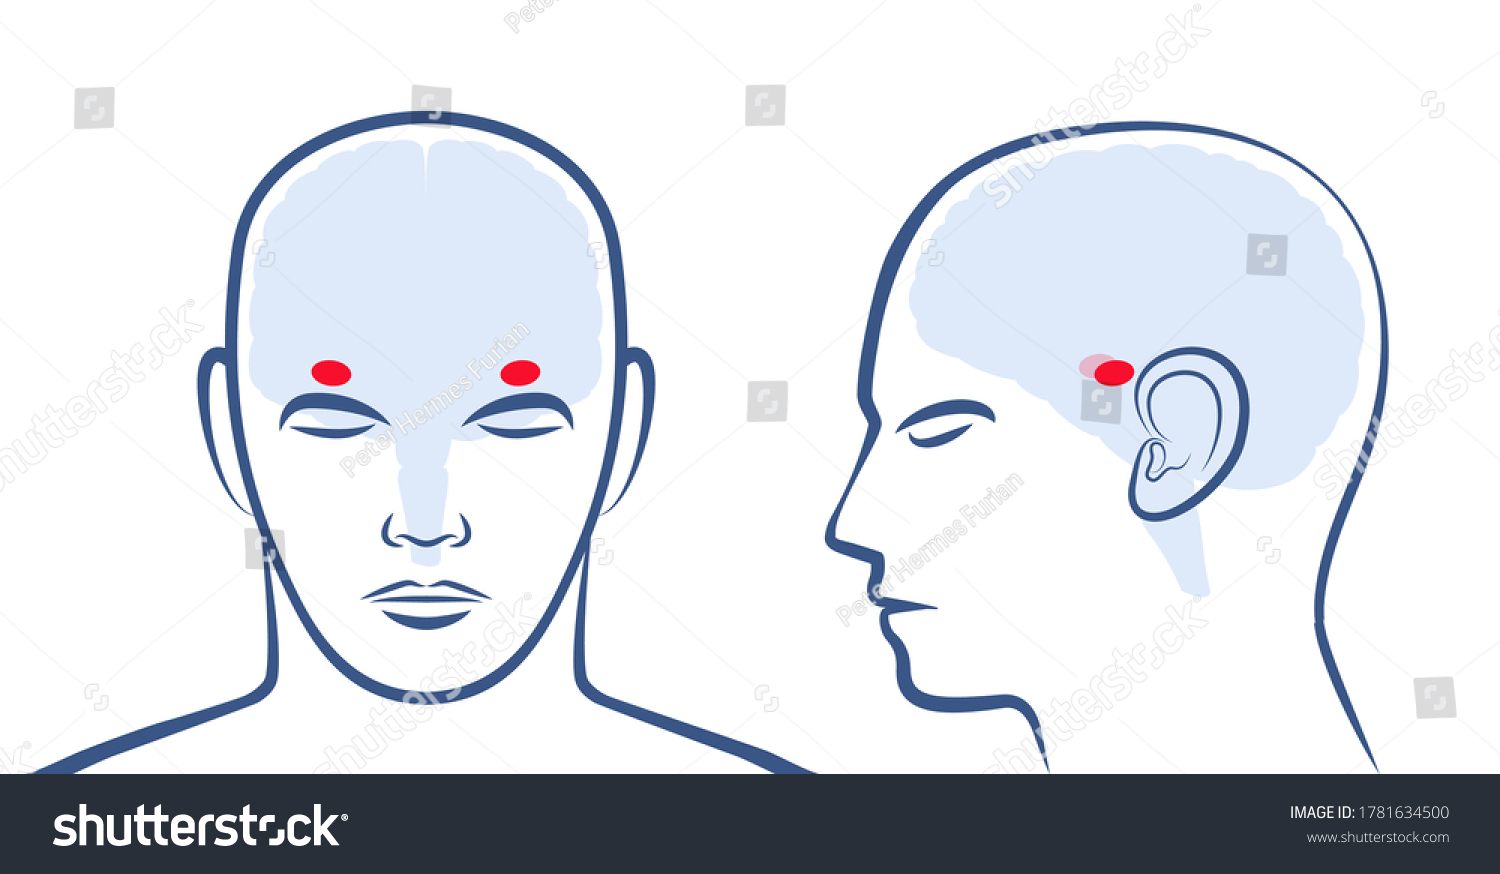 SVG of AMYGDALAE. Location of the two amigdalas in the human brain. Profile and frontal view with positions. Isolated vector graphic illustration on white background.
 svg